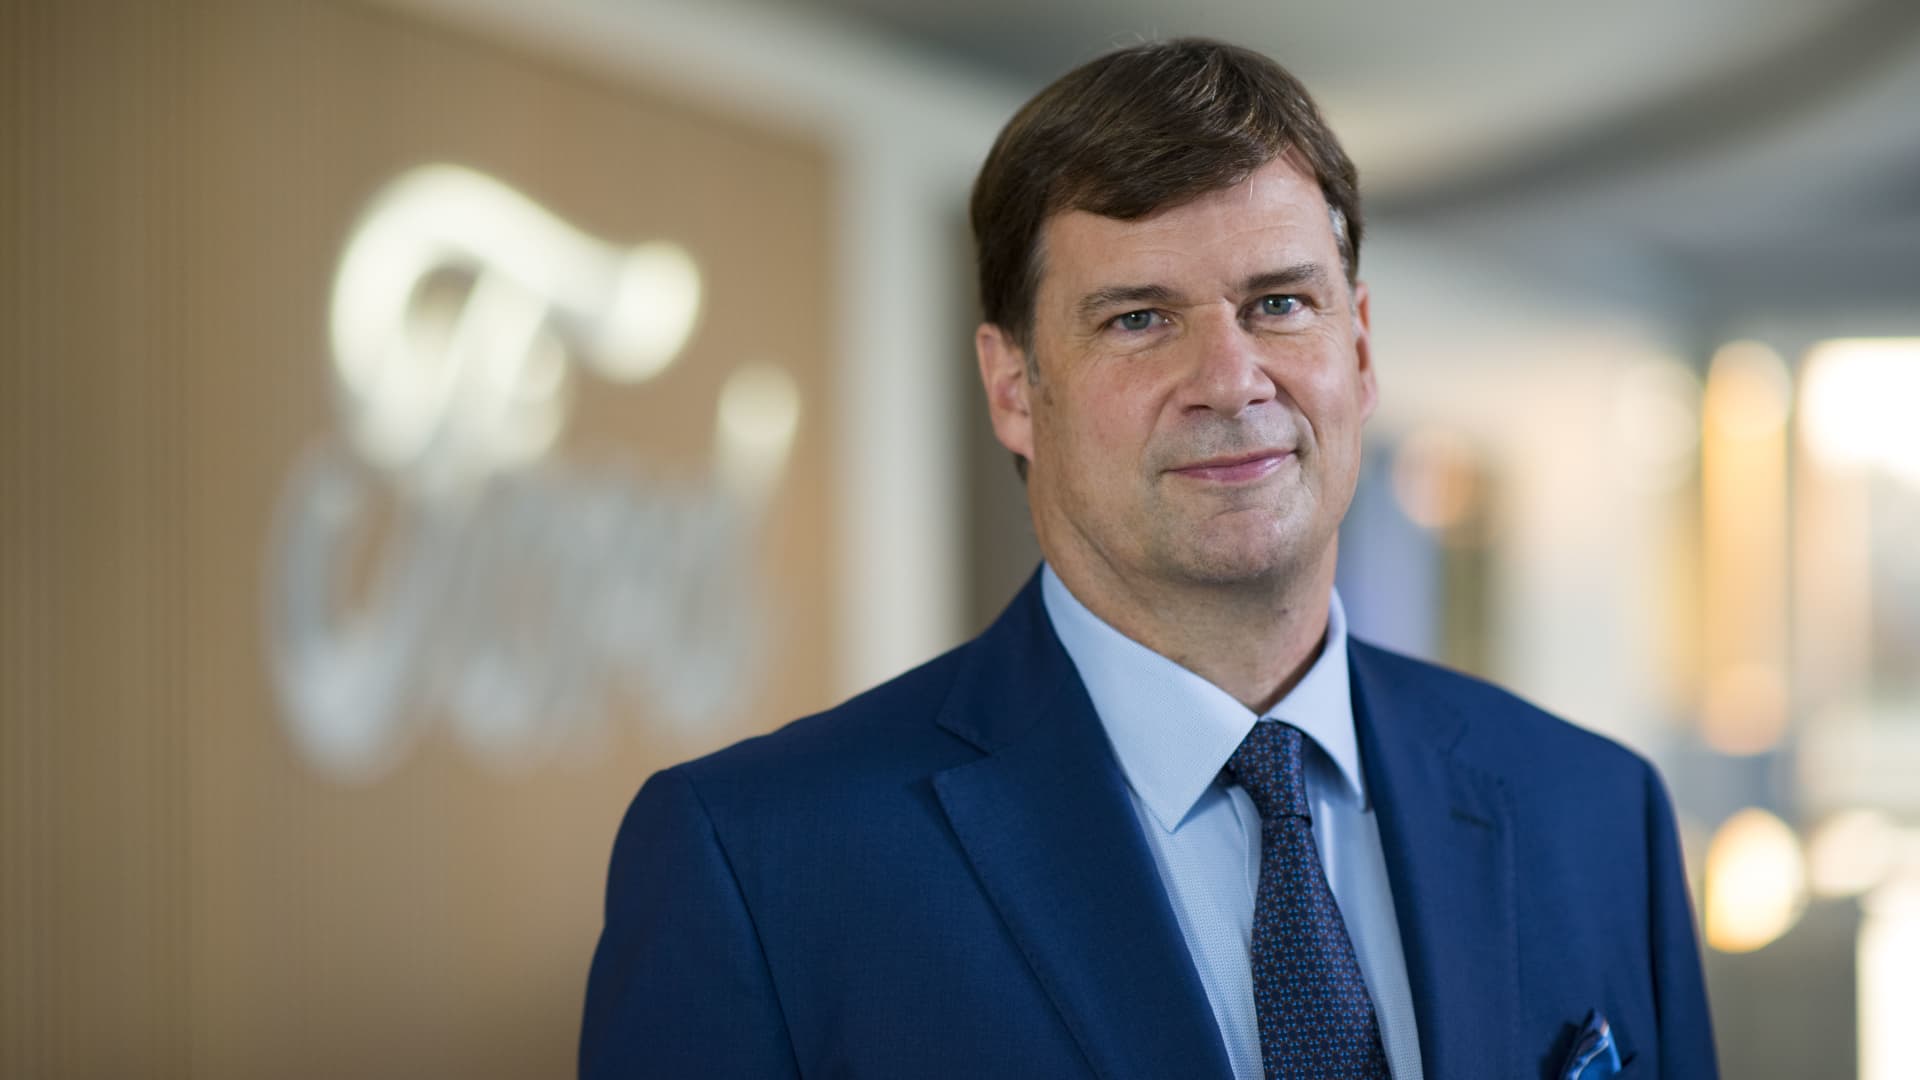 Ford CEO Farley outlined plans for automaker’s electric vehicle shift